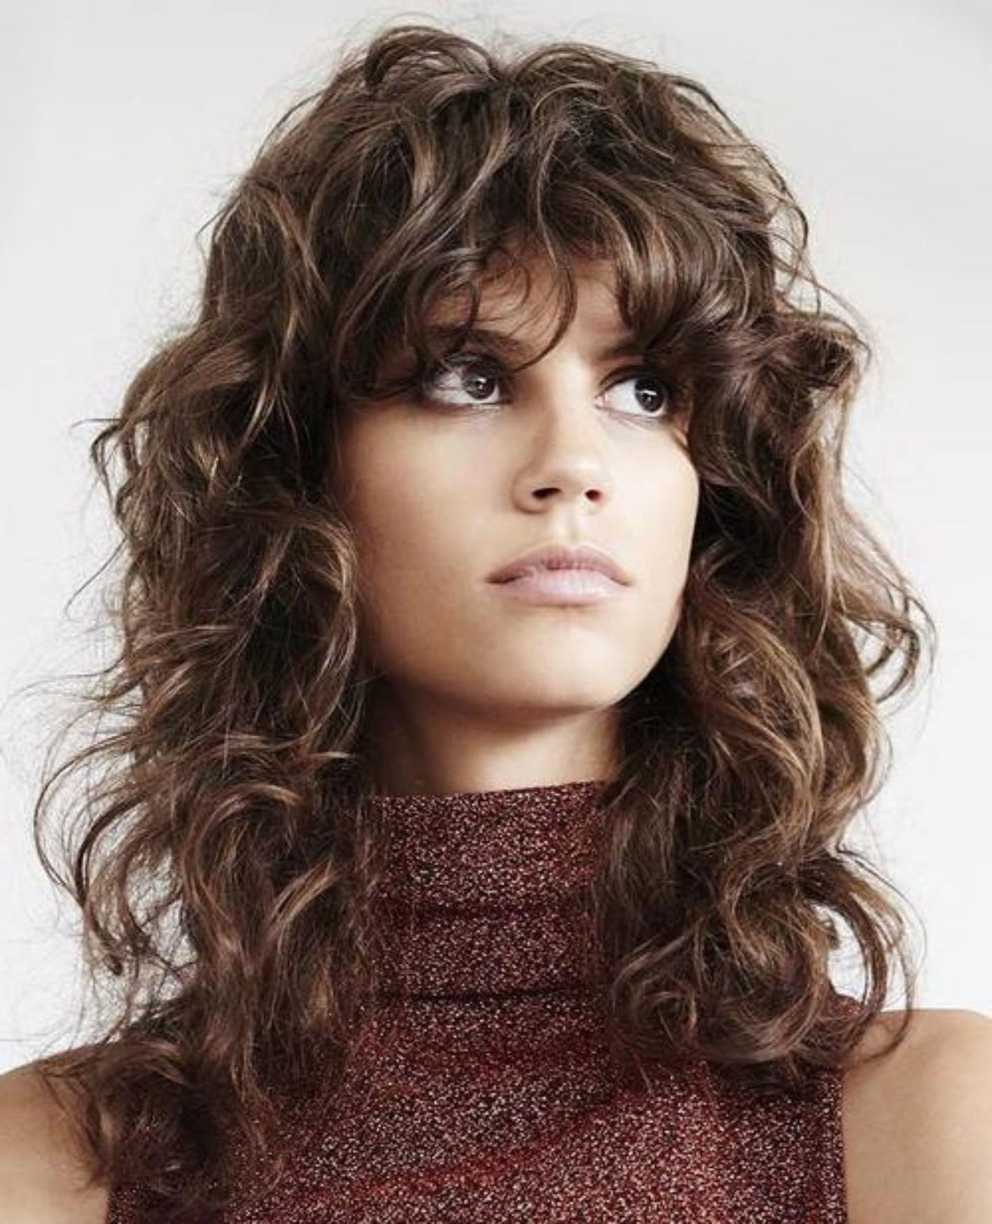 60 Lovely Long Shag Haircuts For Effortless Stylish Looks Intended For Current Long Dynamic Metallic Blonde Shag Haircuts (Gallery 3 of 20)